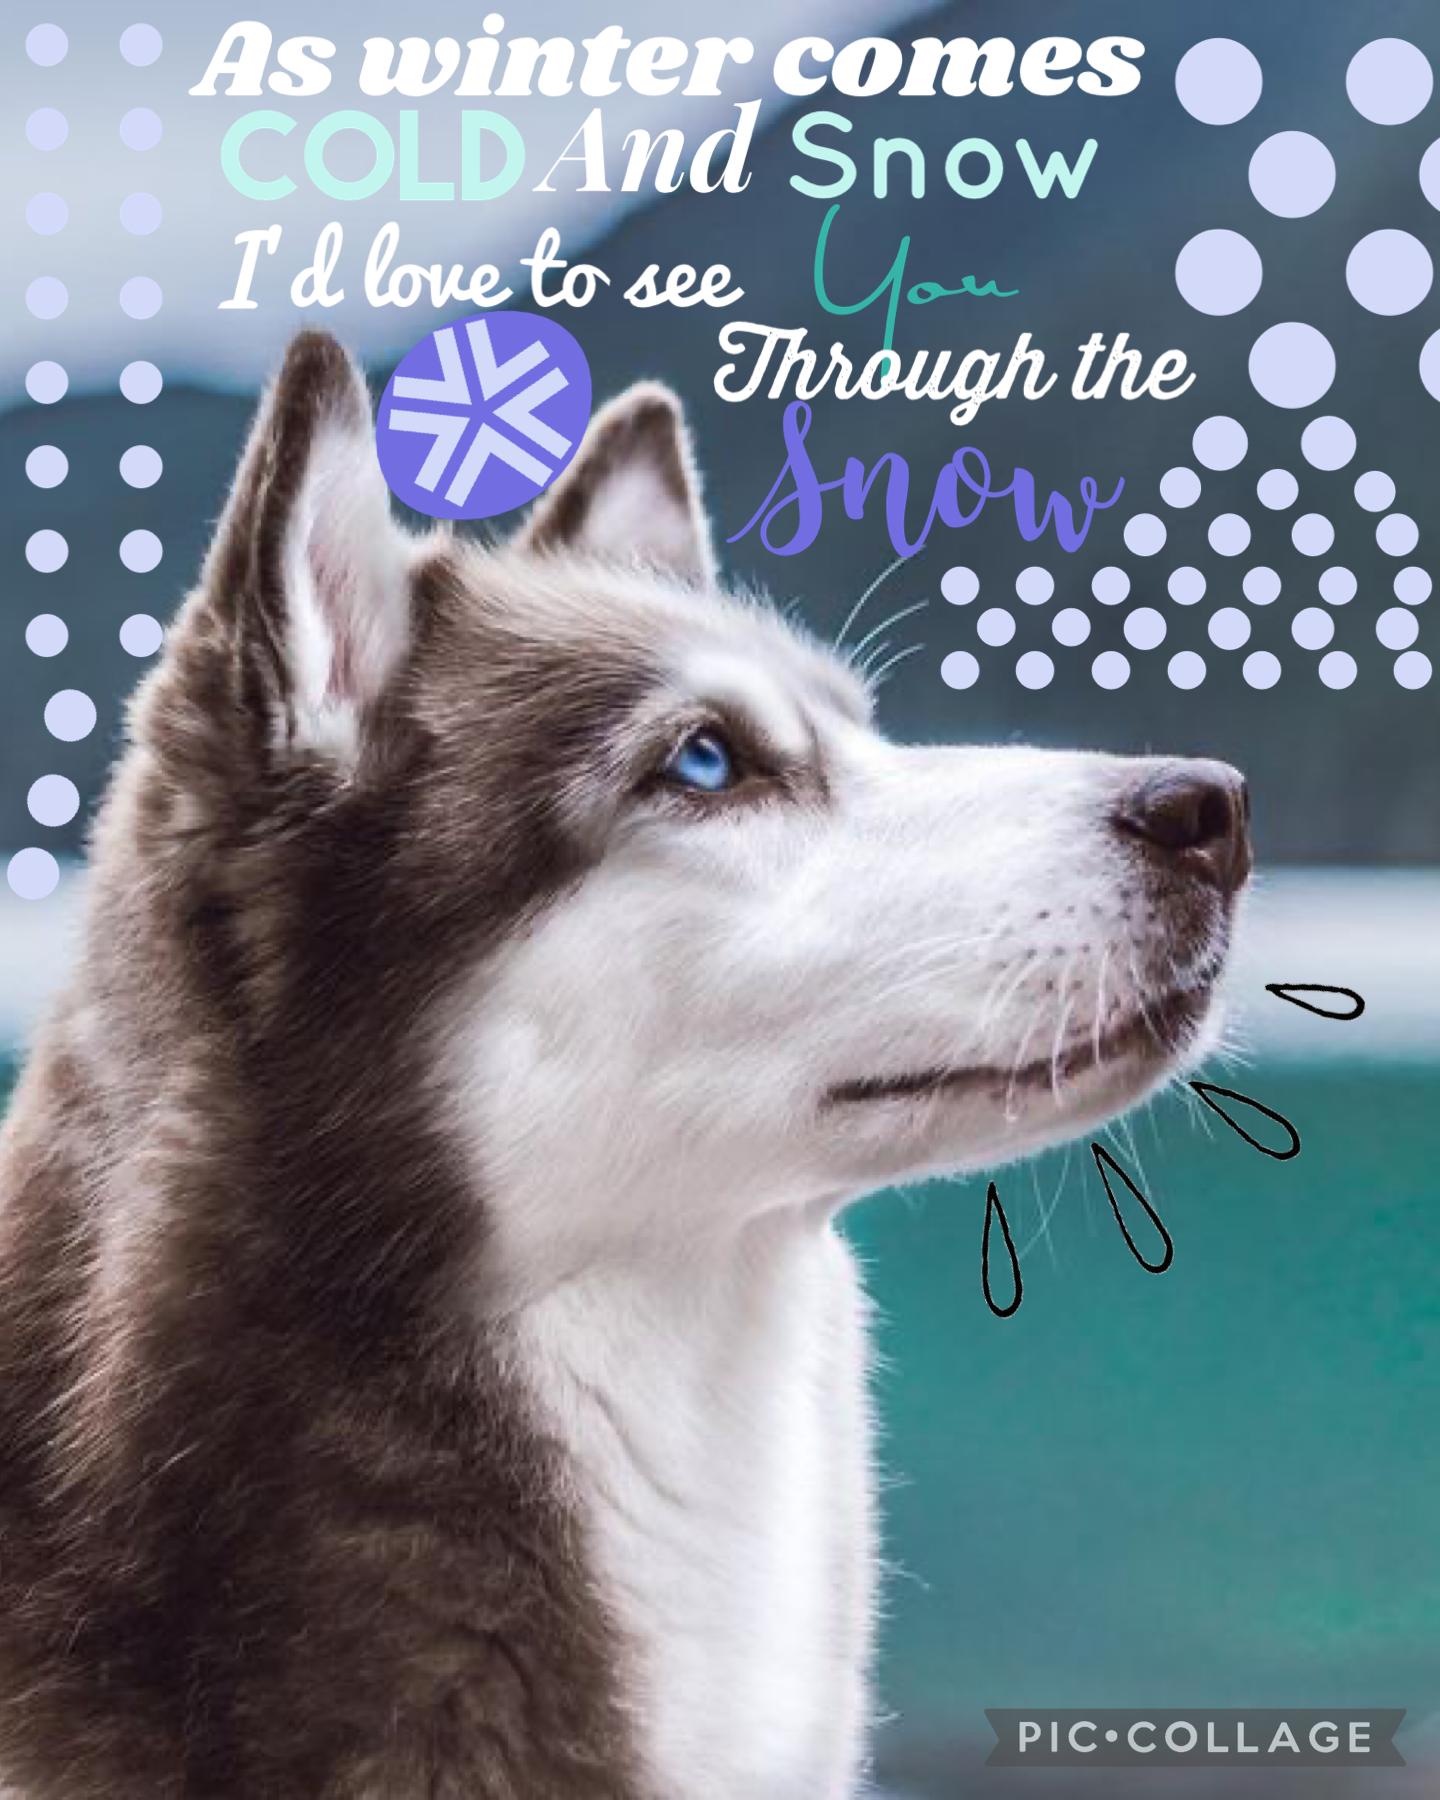 Tap 
I just came up with the text 
And but you might know
(I’m in love with fox/red pandas and wolf)
But this is a husky so…